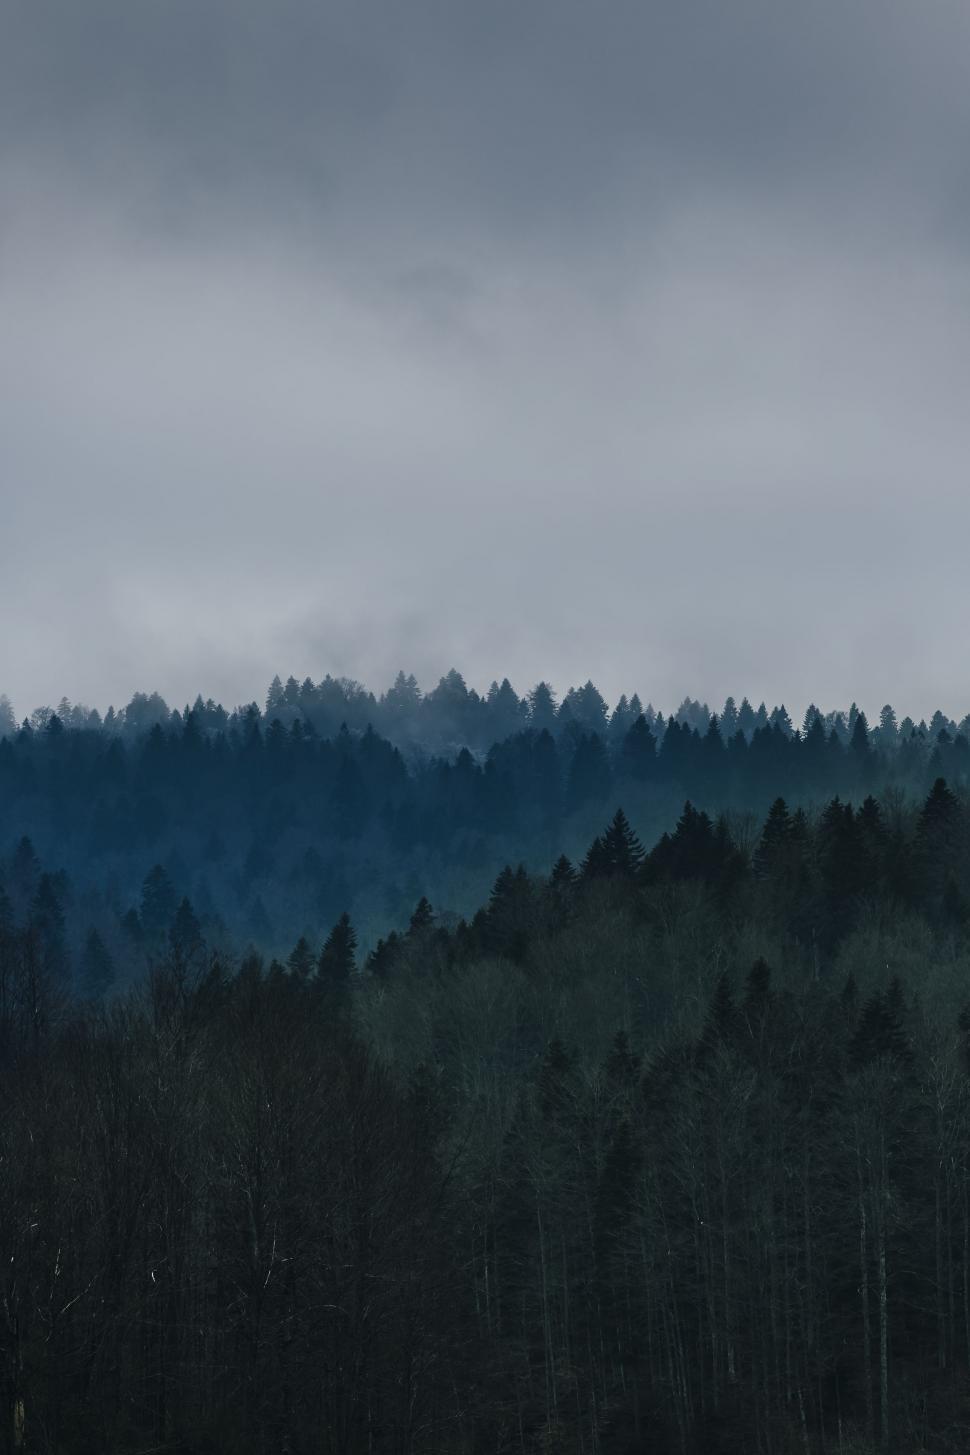 Free Image of Plane Flying Over Forest on Cloudy Day 